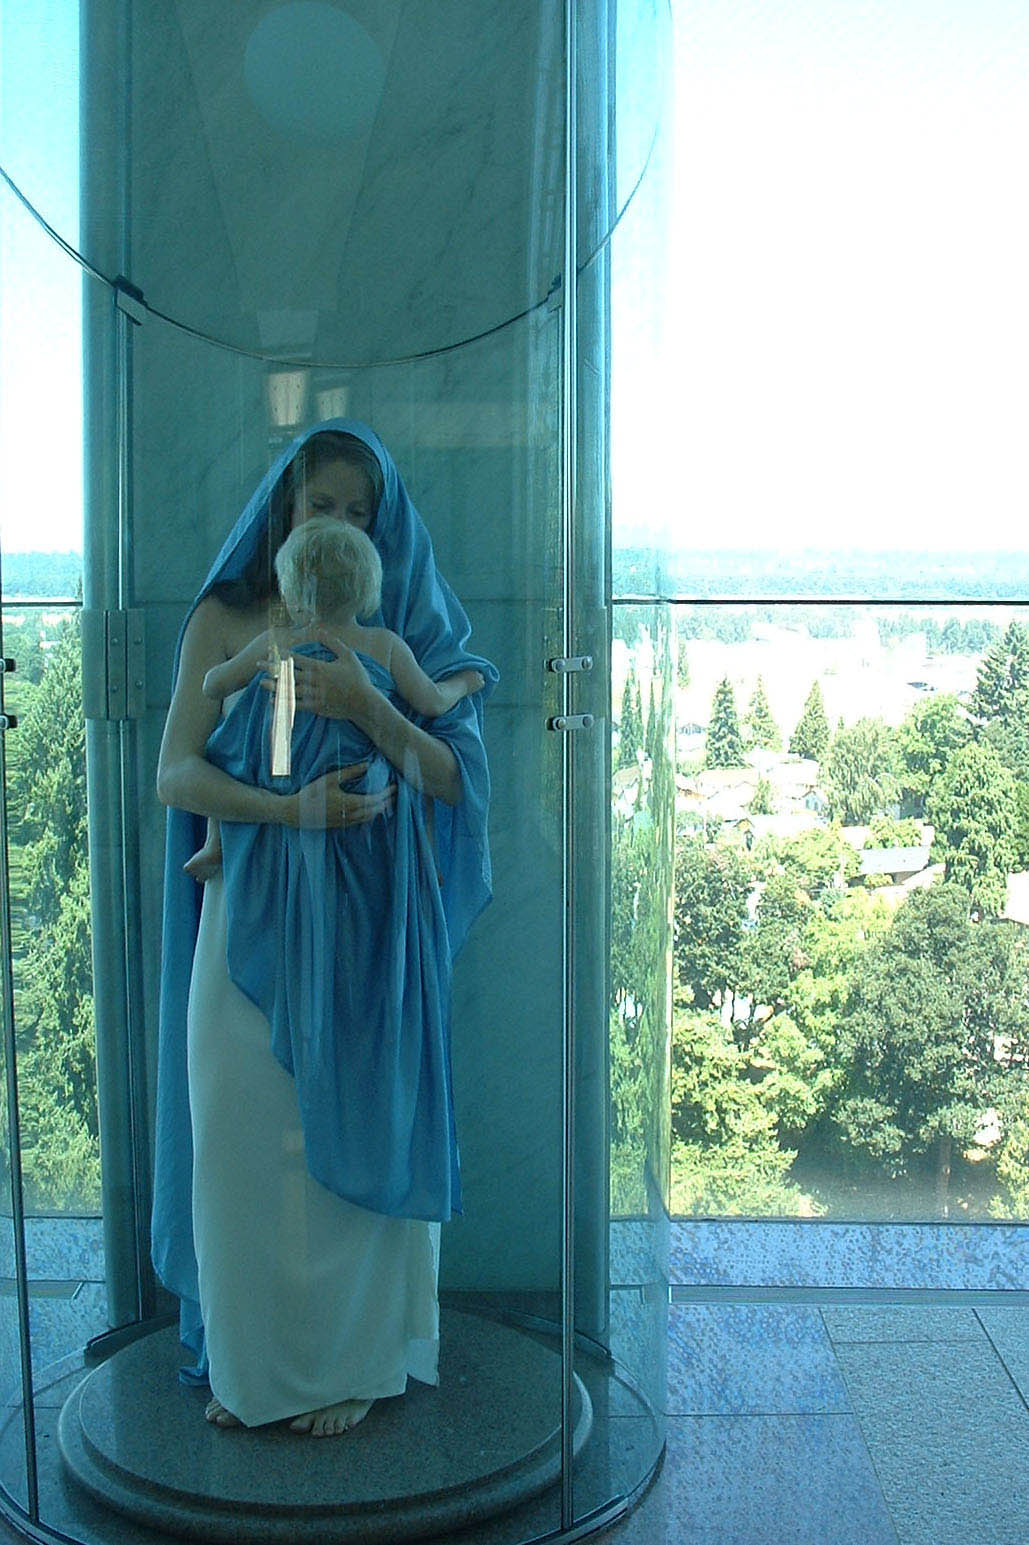 Portland Grotto-2 Amazing life-like statue of Mary and Child inside the Grotto viewing area at the top of the tower